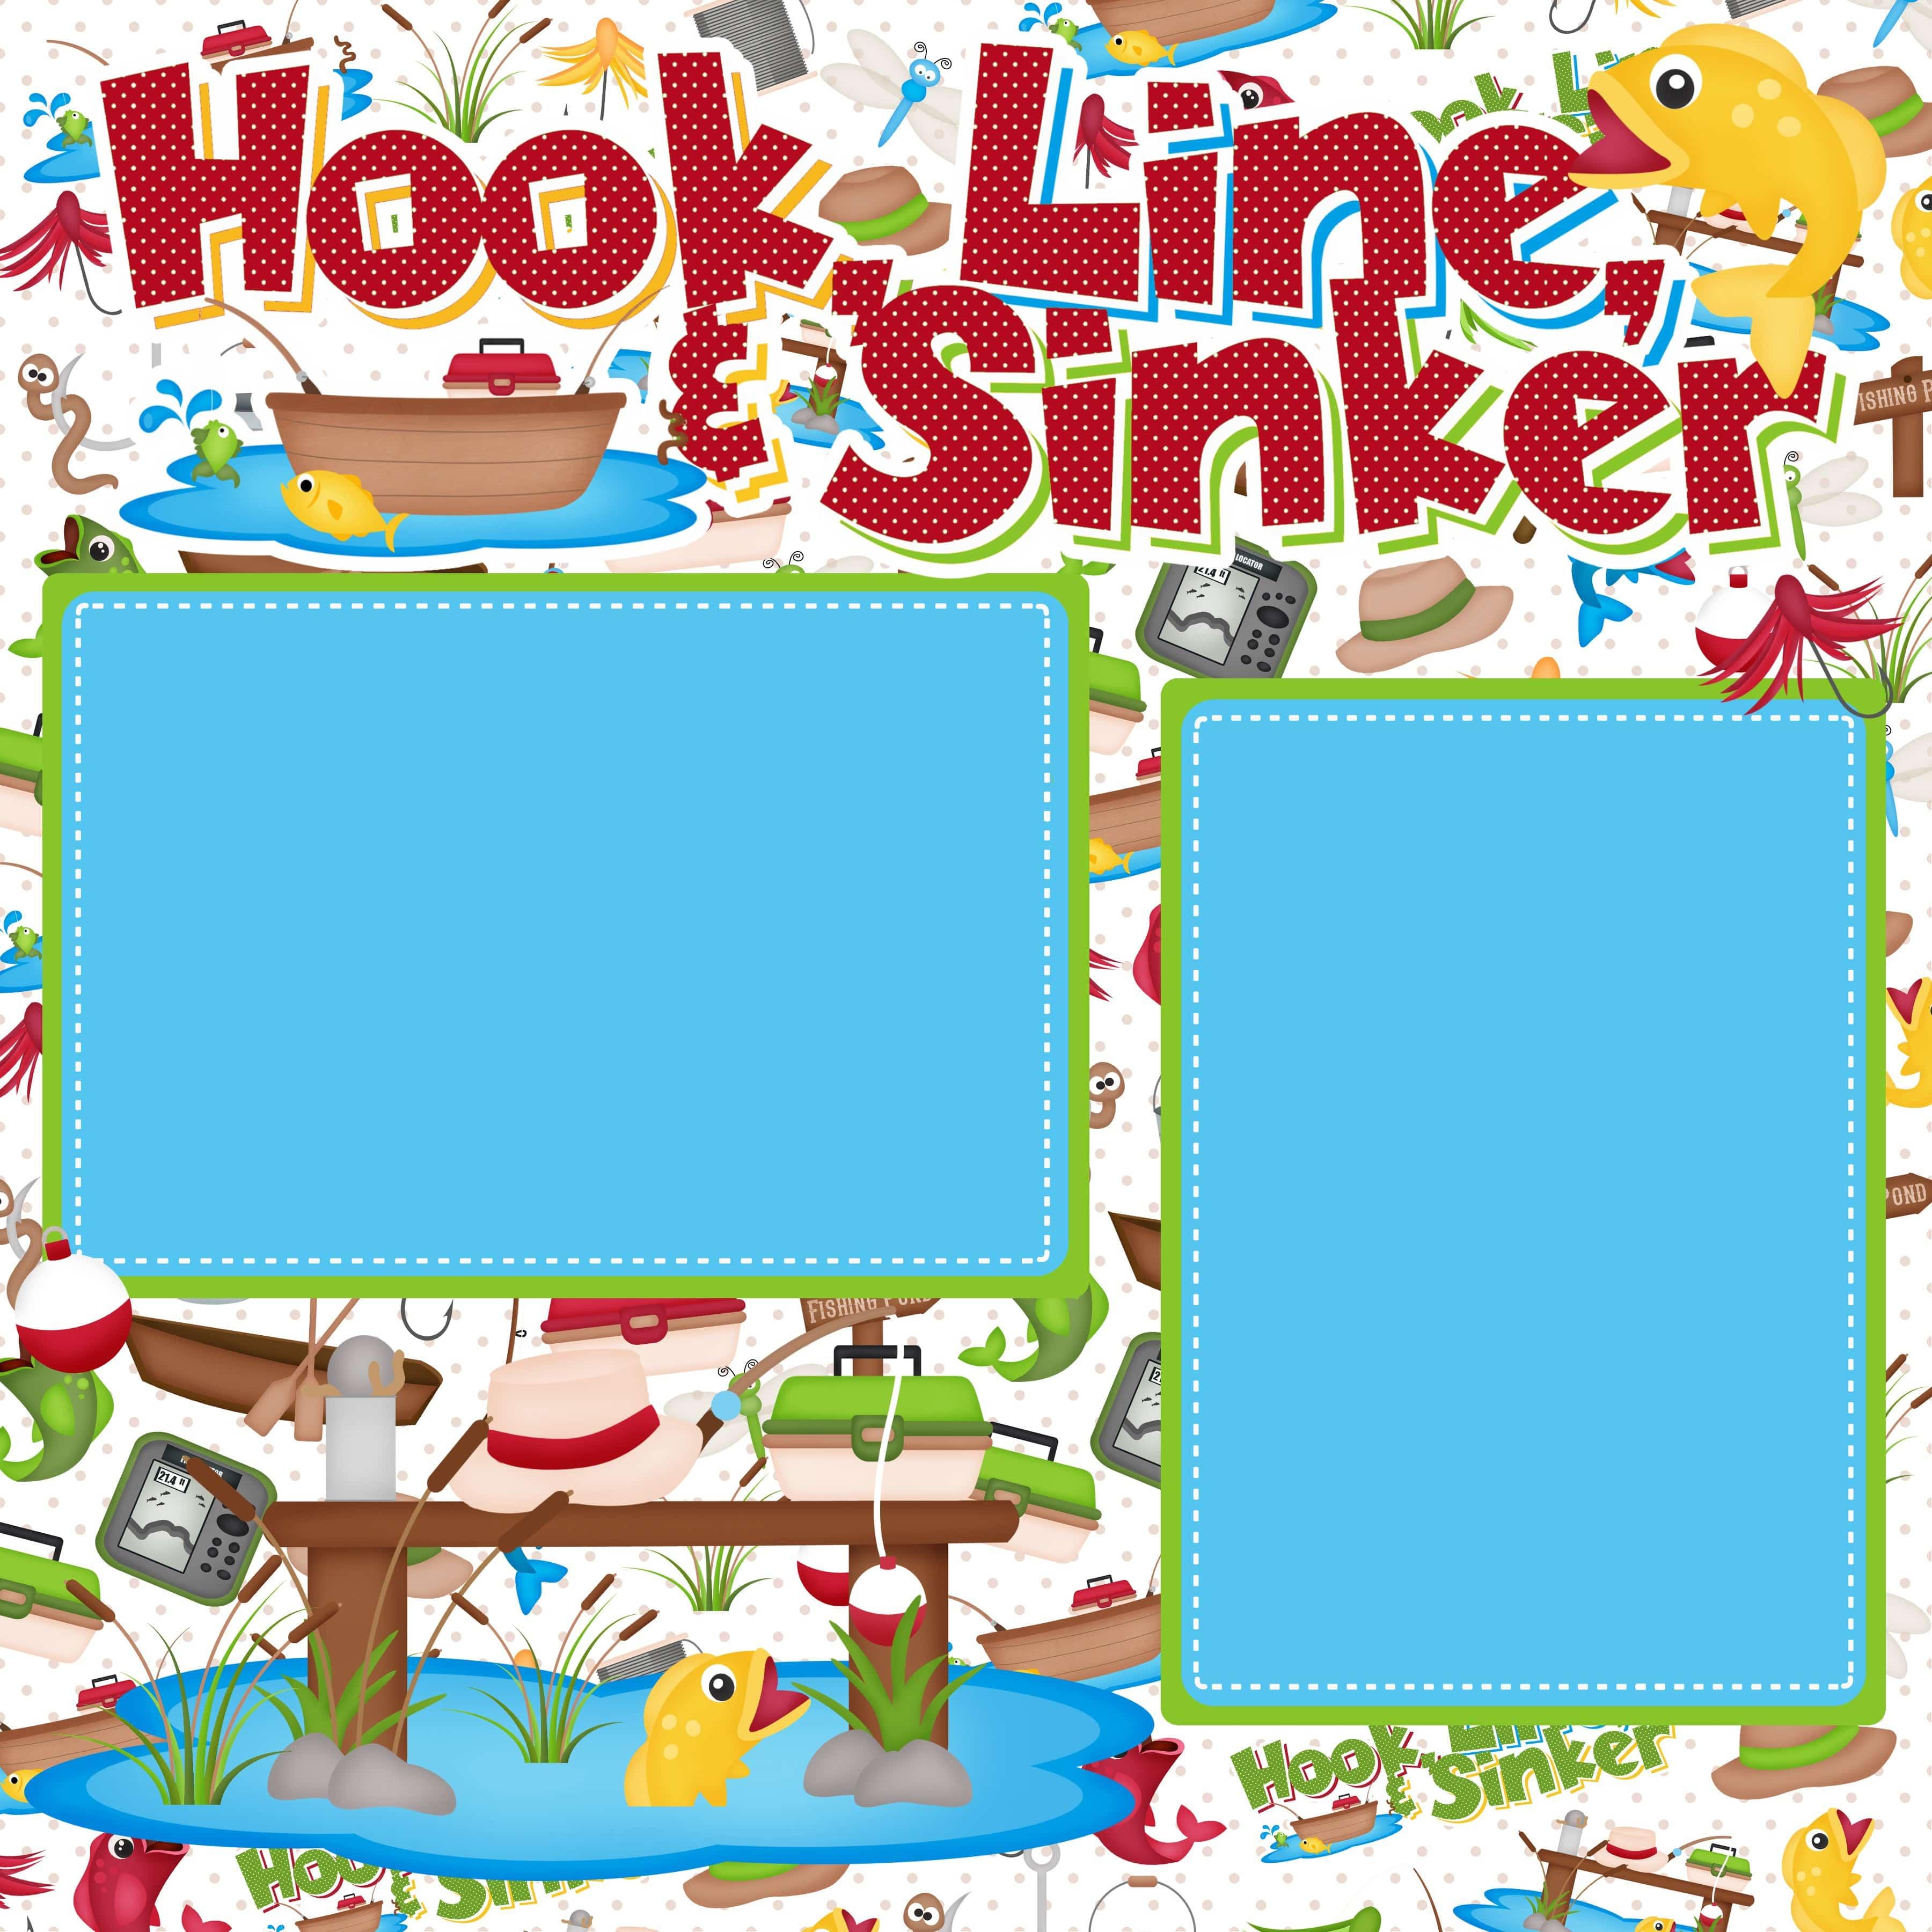 Hook, Line & Sinker Collection Let's Go Fishing (2) - 12 x 12 Premade, Printed Scrapbook Pages by SSC Designs - Scrapbook Supply Companies